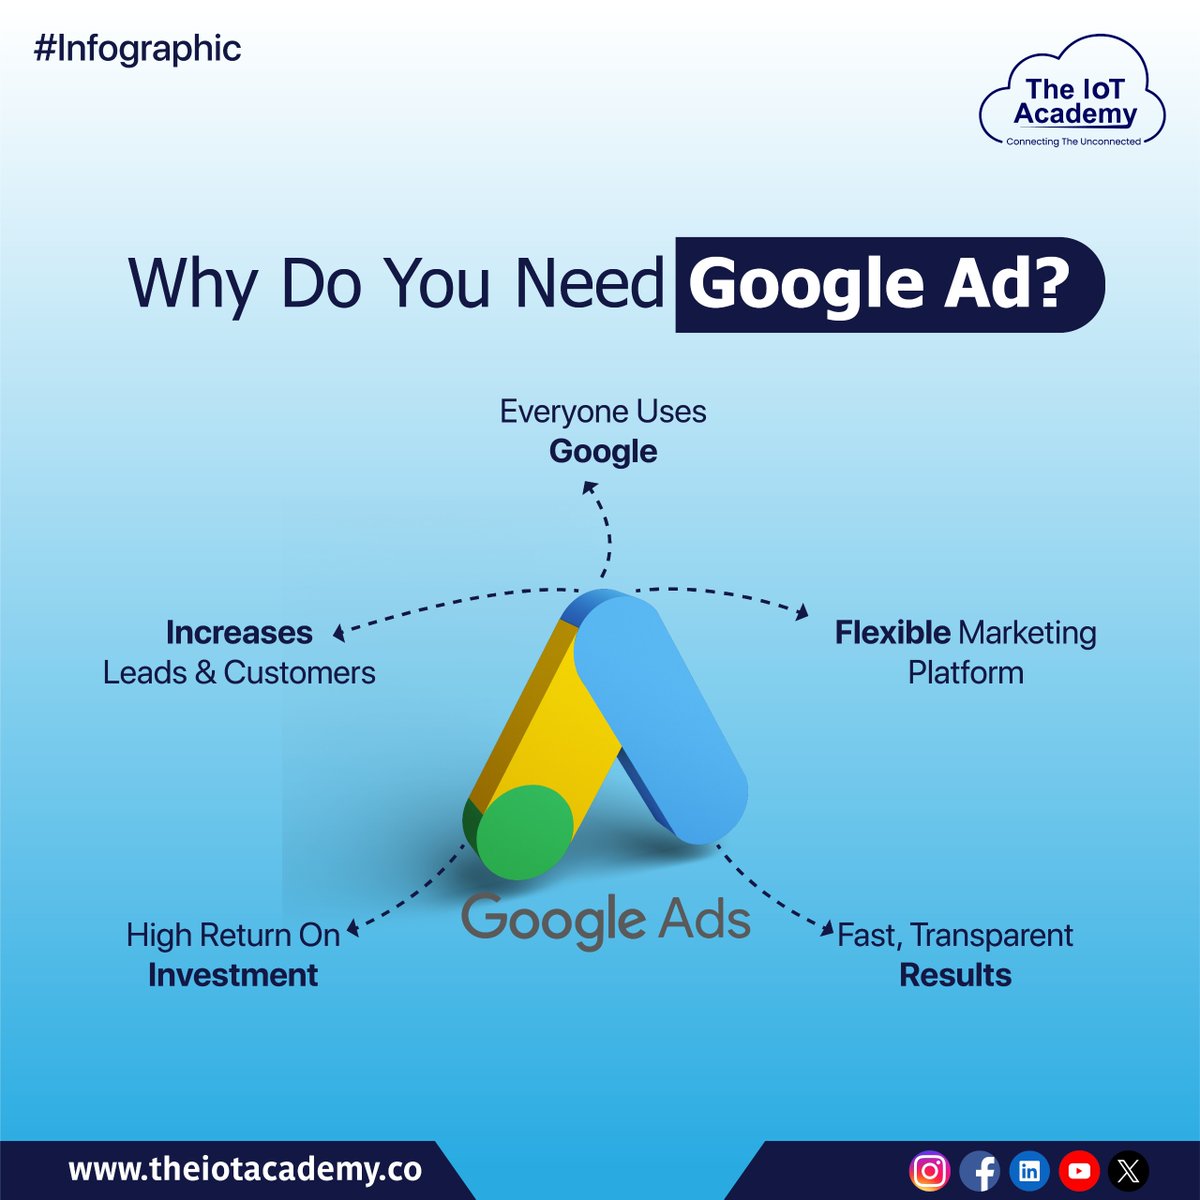 🌟 Boost your business with Google Ads! 📈 Reach millions of potential customers 🌍 Target specific audiences & increase your brand visibility.
.
.
.
#TheIoTAcademy #edtech #education #GoogleAds #DigitalMarketing #GoogleAdsBenefits #GrowYourBusiness #WebsiteTraffic #BoostOnline